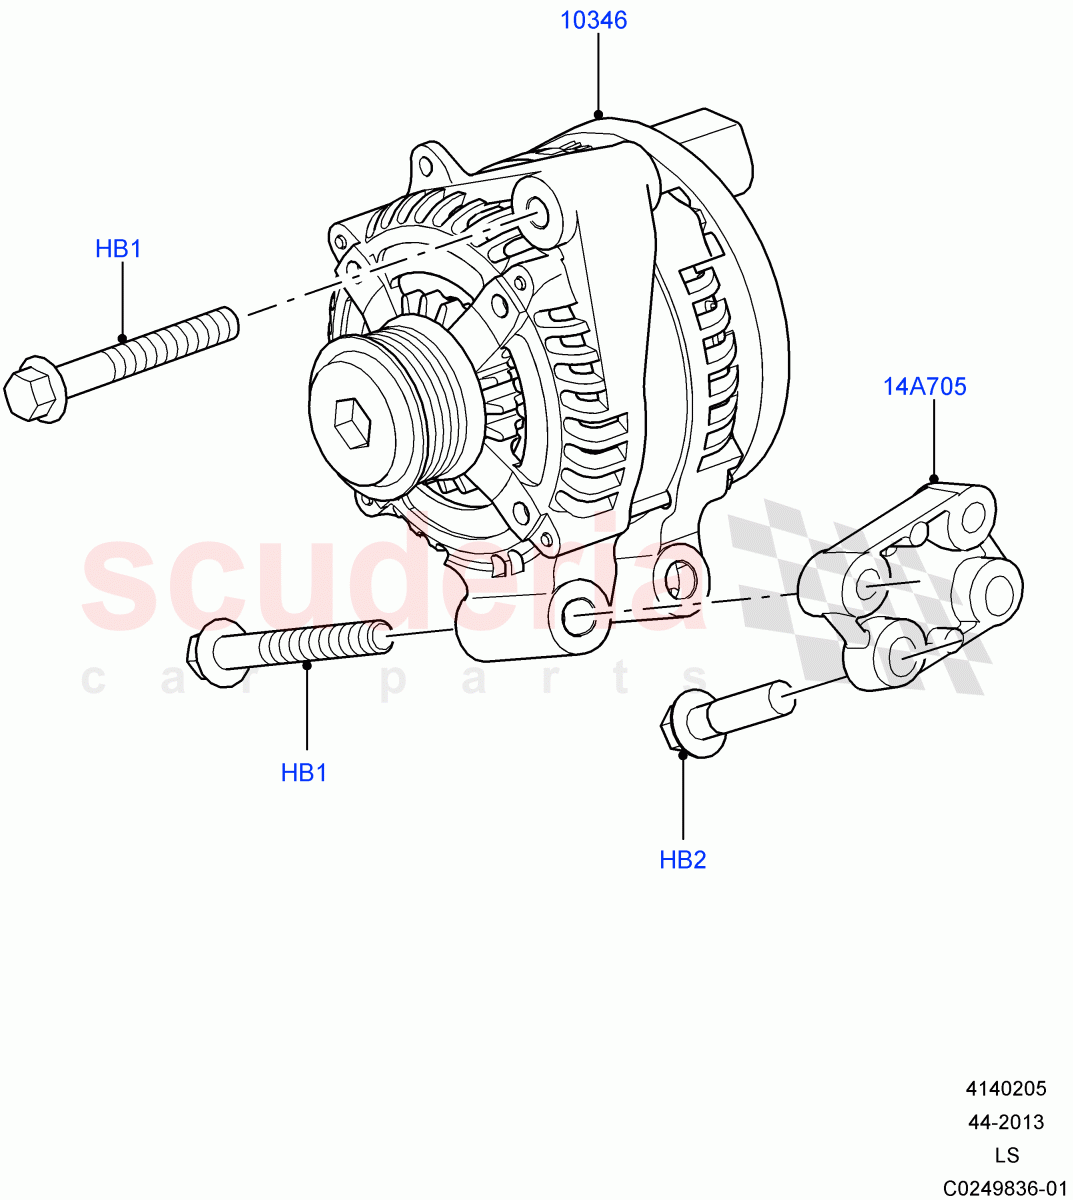 Alternator And Mountings(3.0L DOHC GDI SC V6 PETROL)((V)FROMEA000001) of Land Rover Land Rover Discovery 4 (2010-2016) [3.0 DOHC GDI SC V6 Petrol]